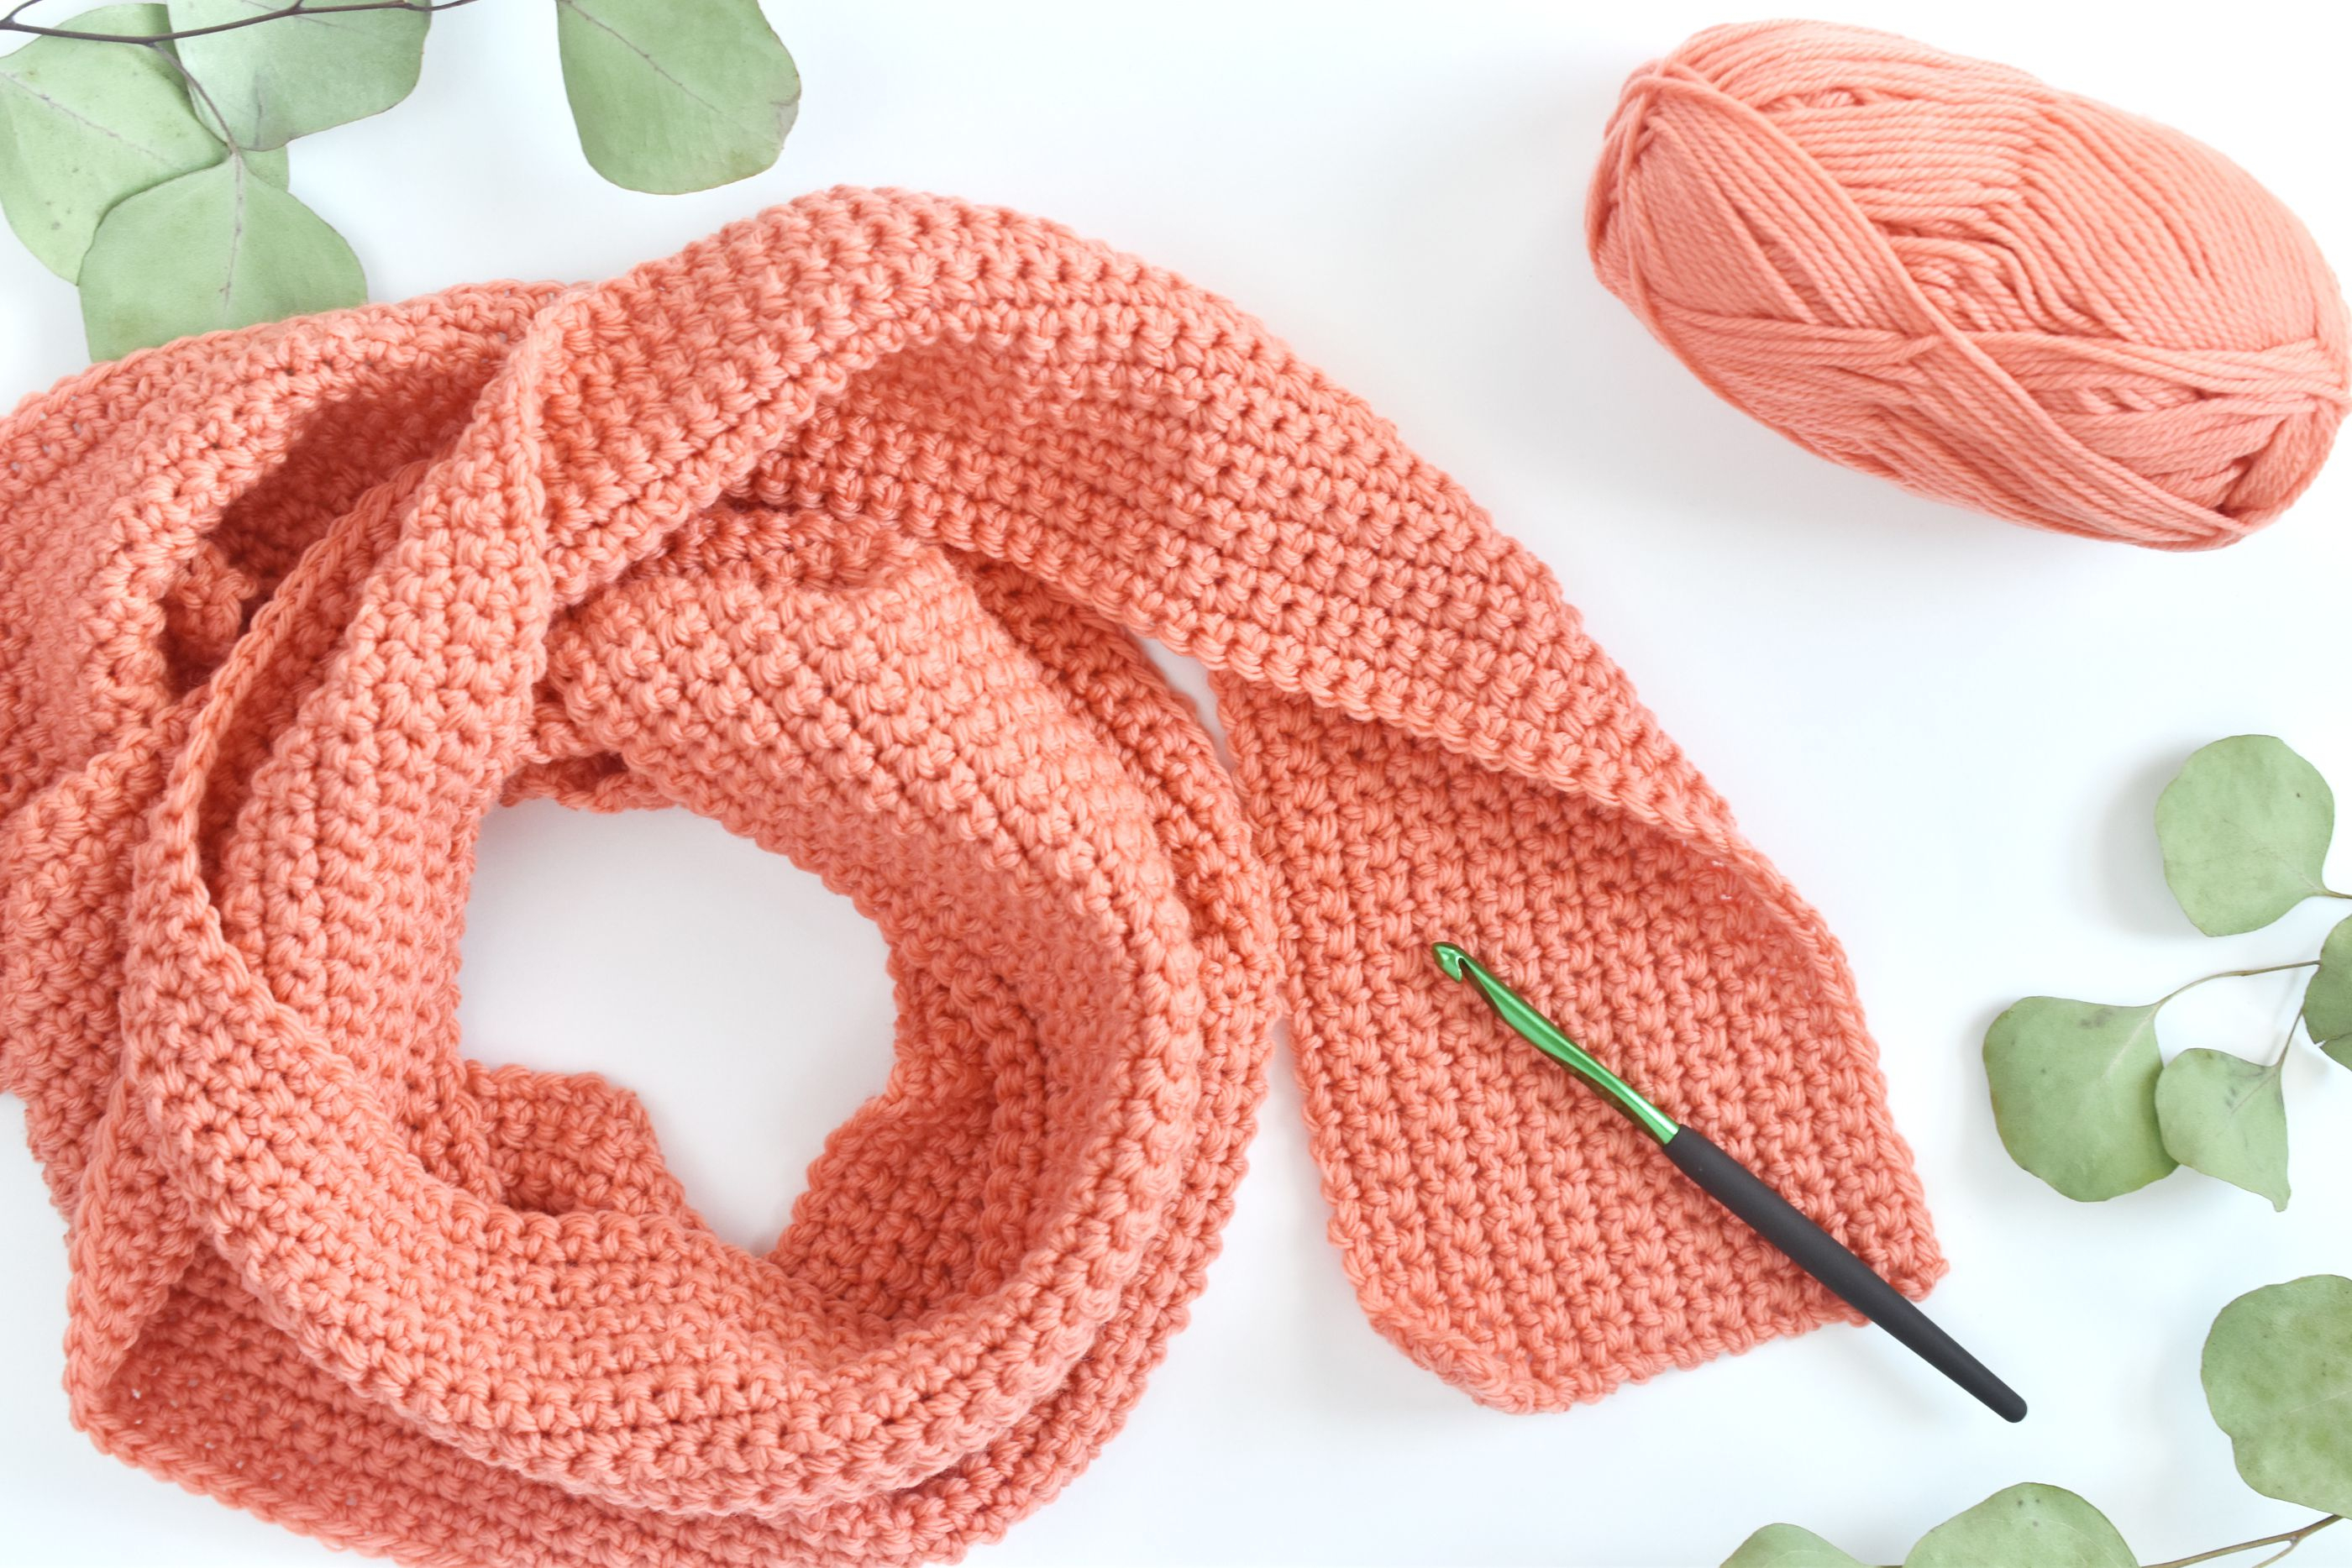 Crochet Infinity Scarf Free Pattern  How To Crochet A Scarf For Beginners